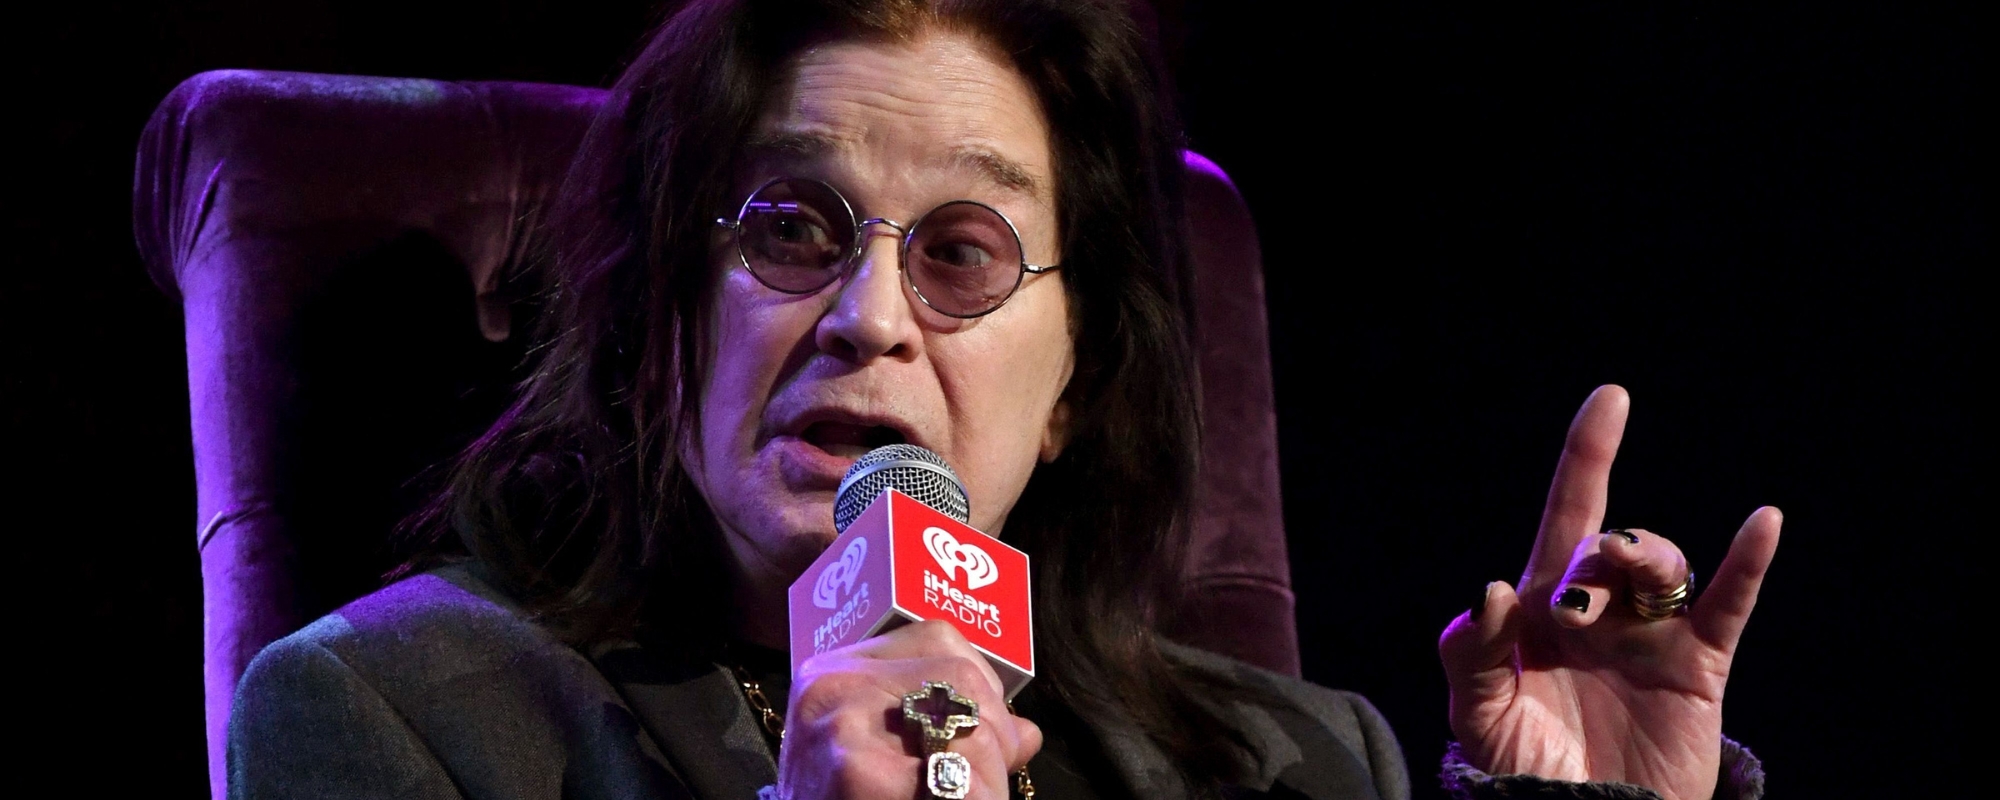 The New Feud Between Ozzy Osbourne and Geezer Butler Explained